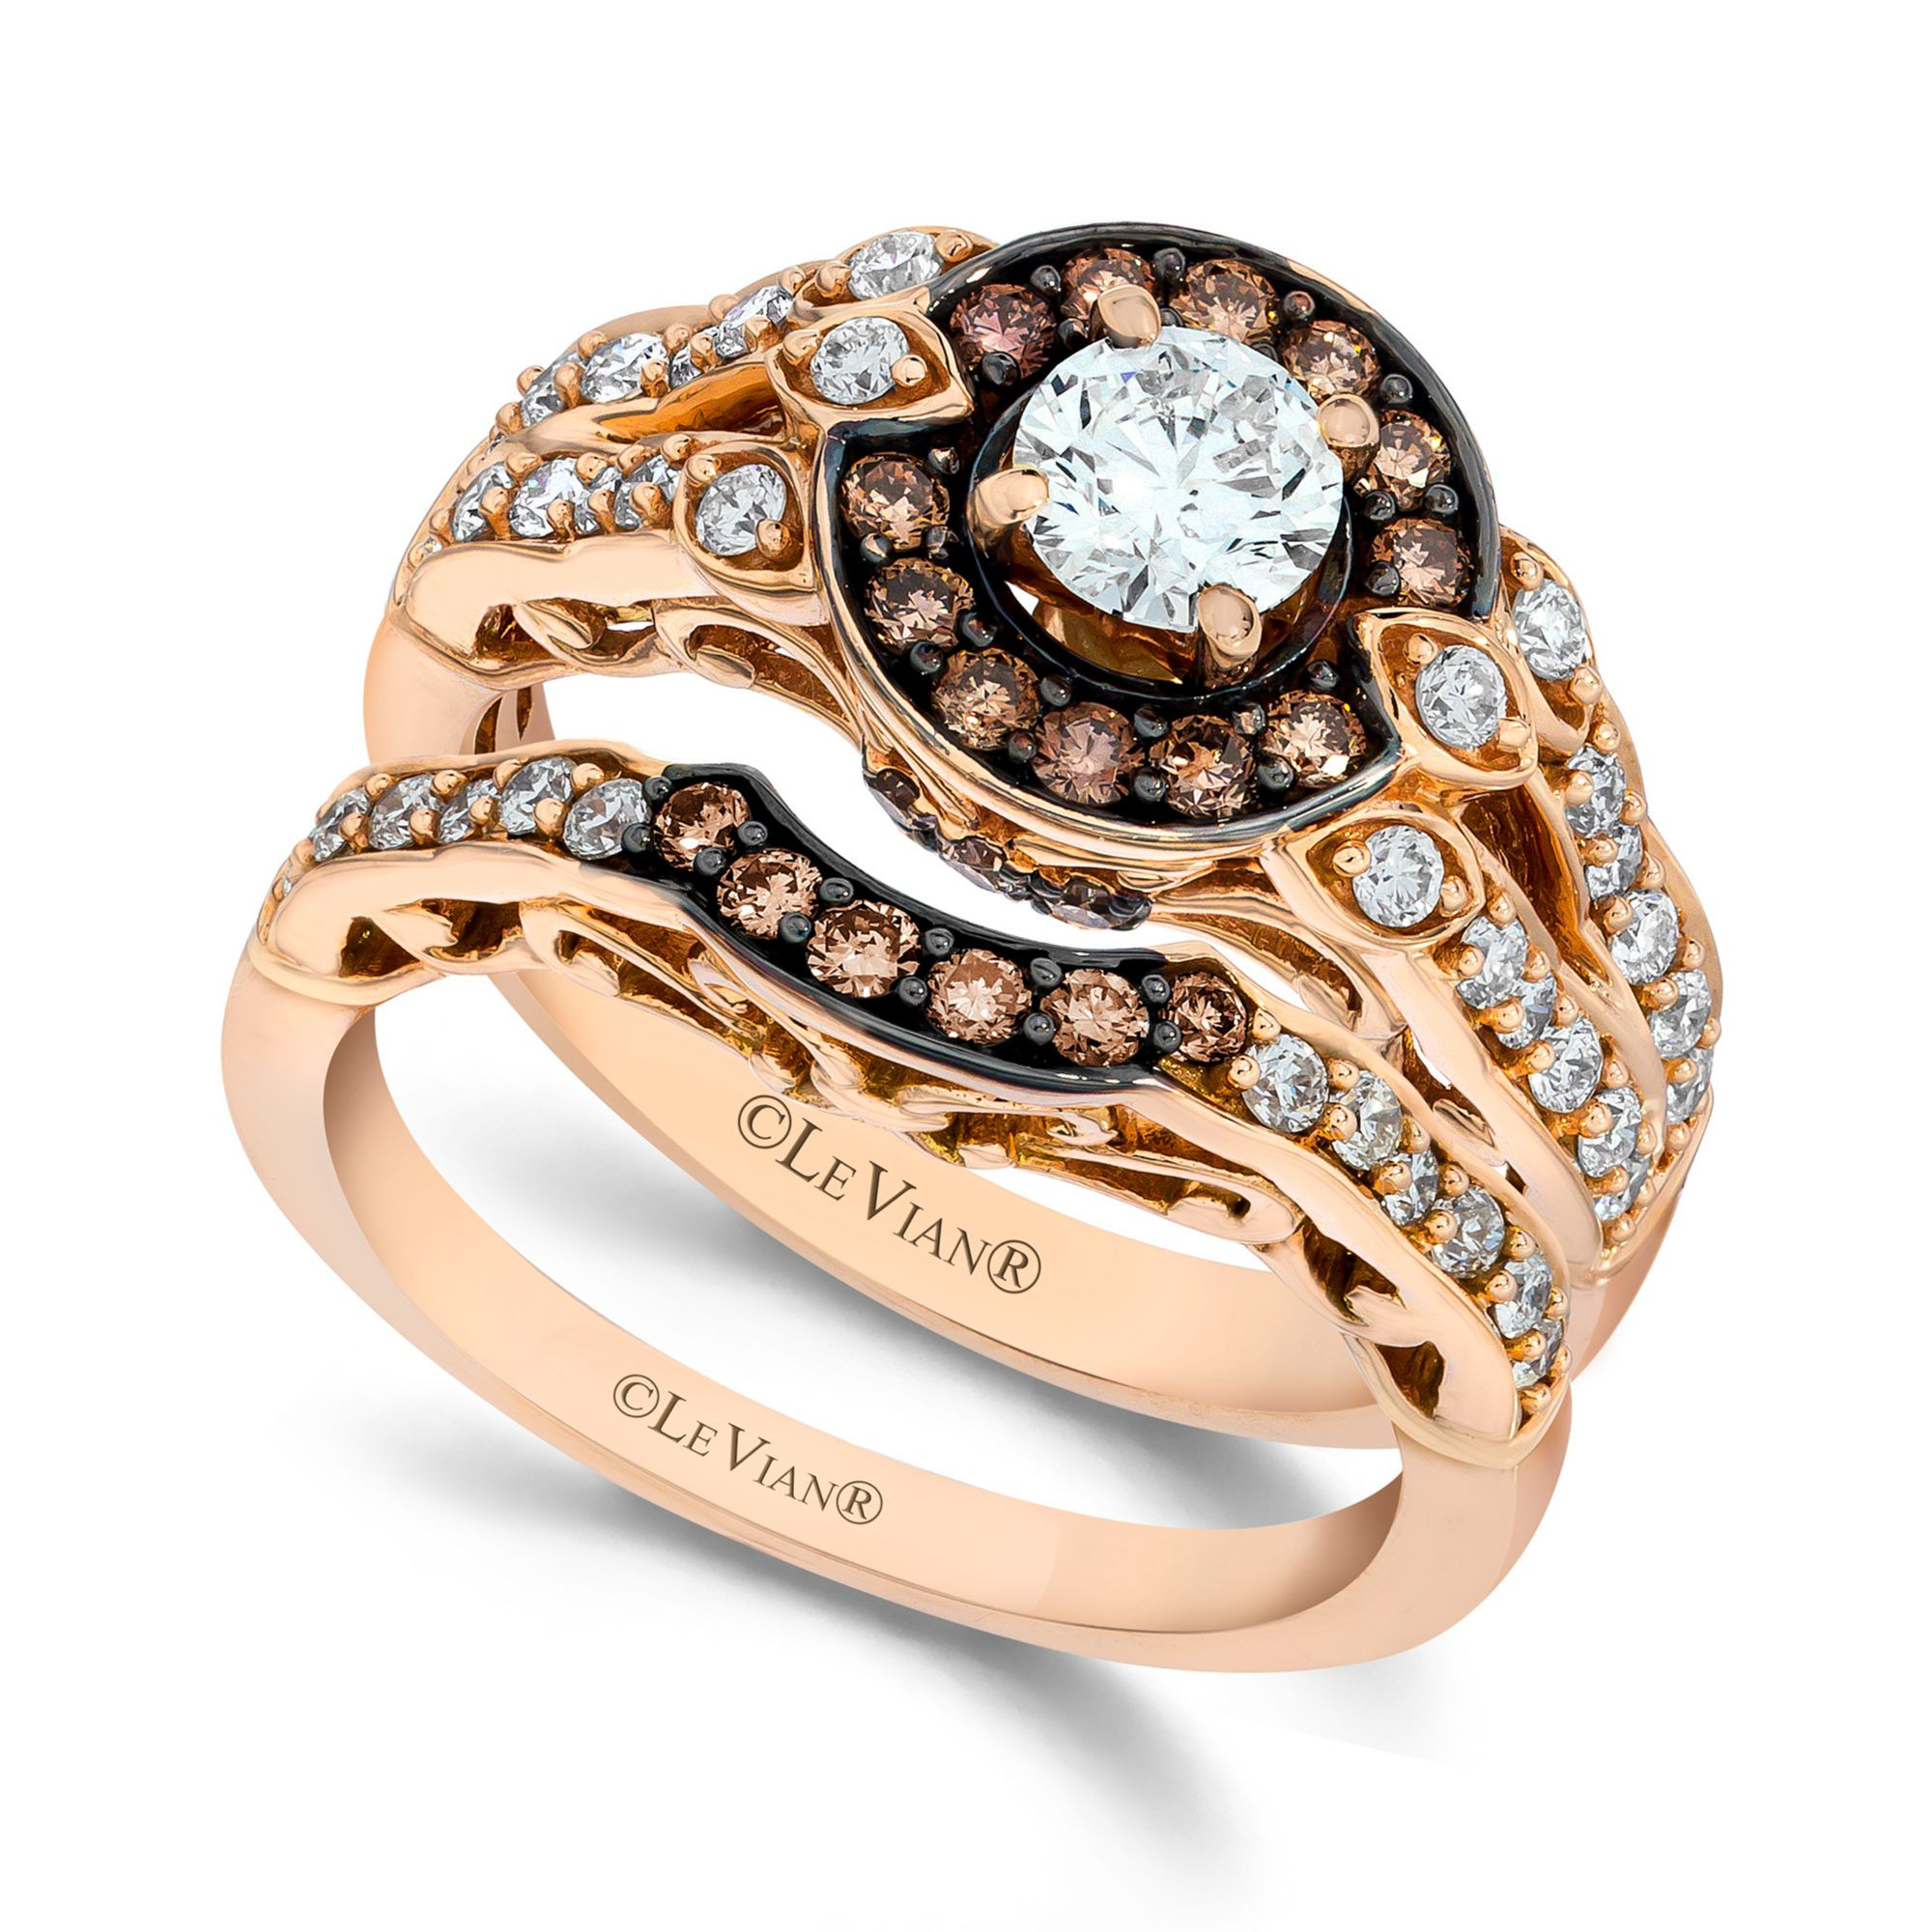 Rose Gold Engagement Rings With Chocolate Diamonds
 Lyst Le Vian Chocolate and White Diamond Engagement Ring